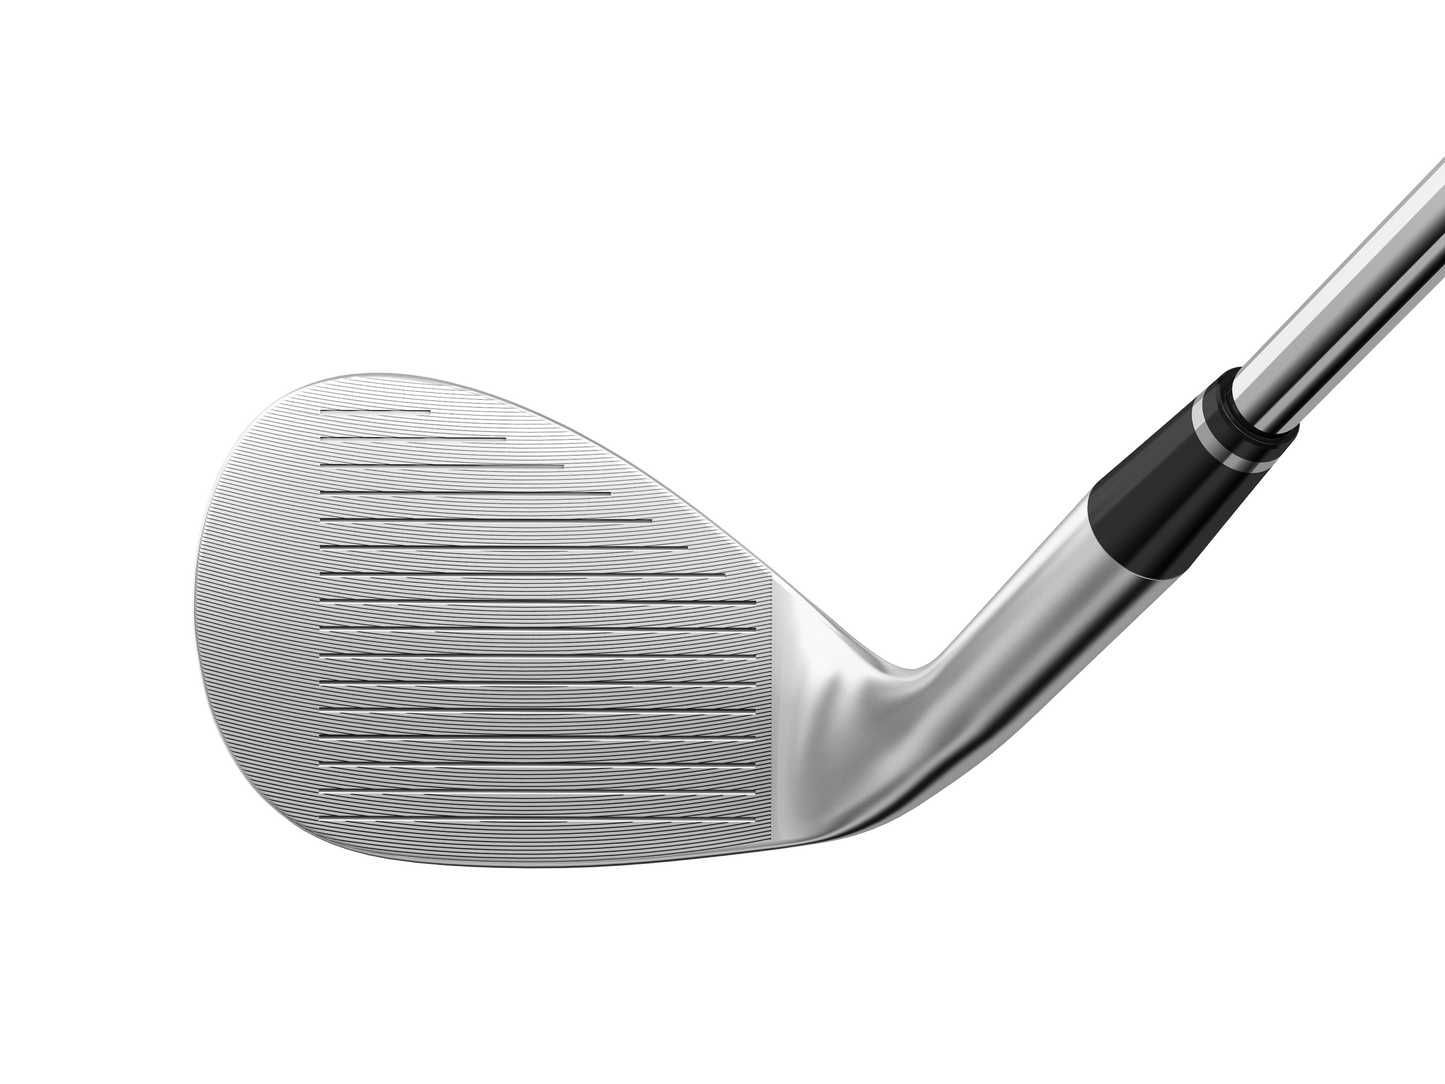 Tour Silver Flop Wedge (58)